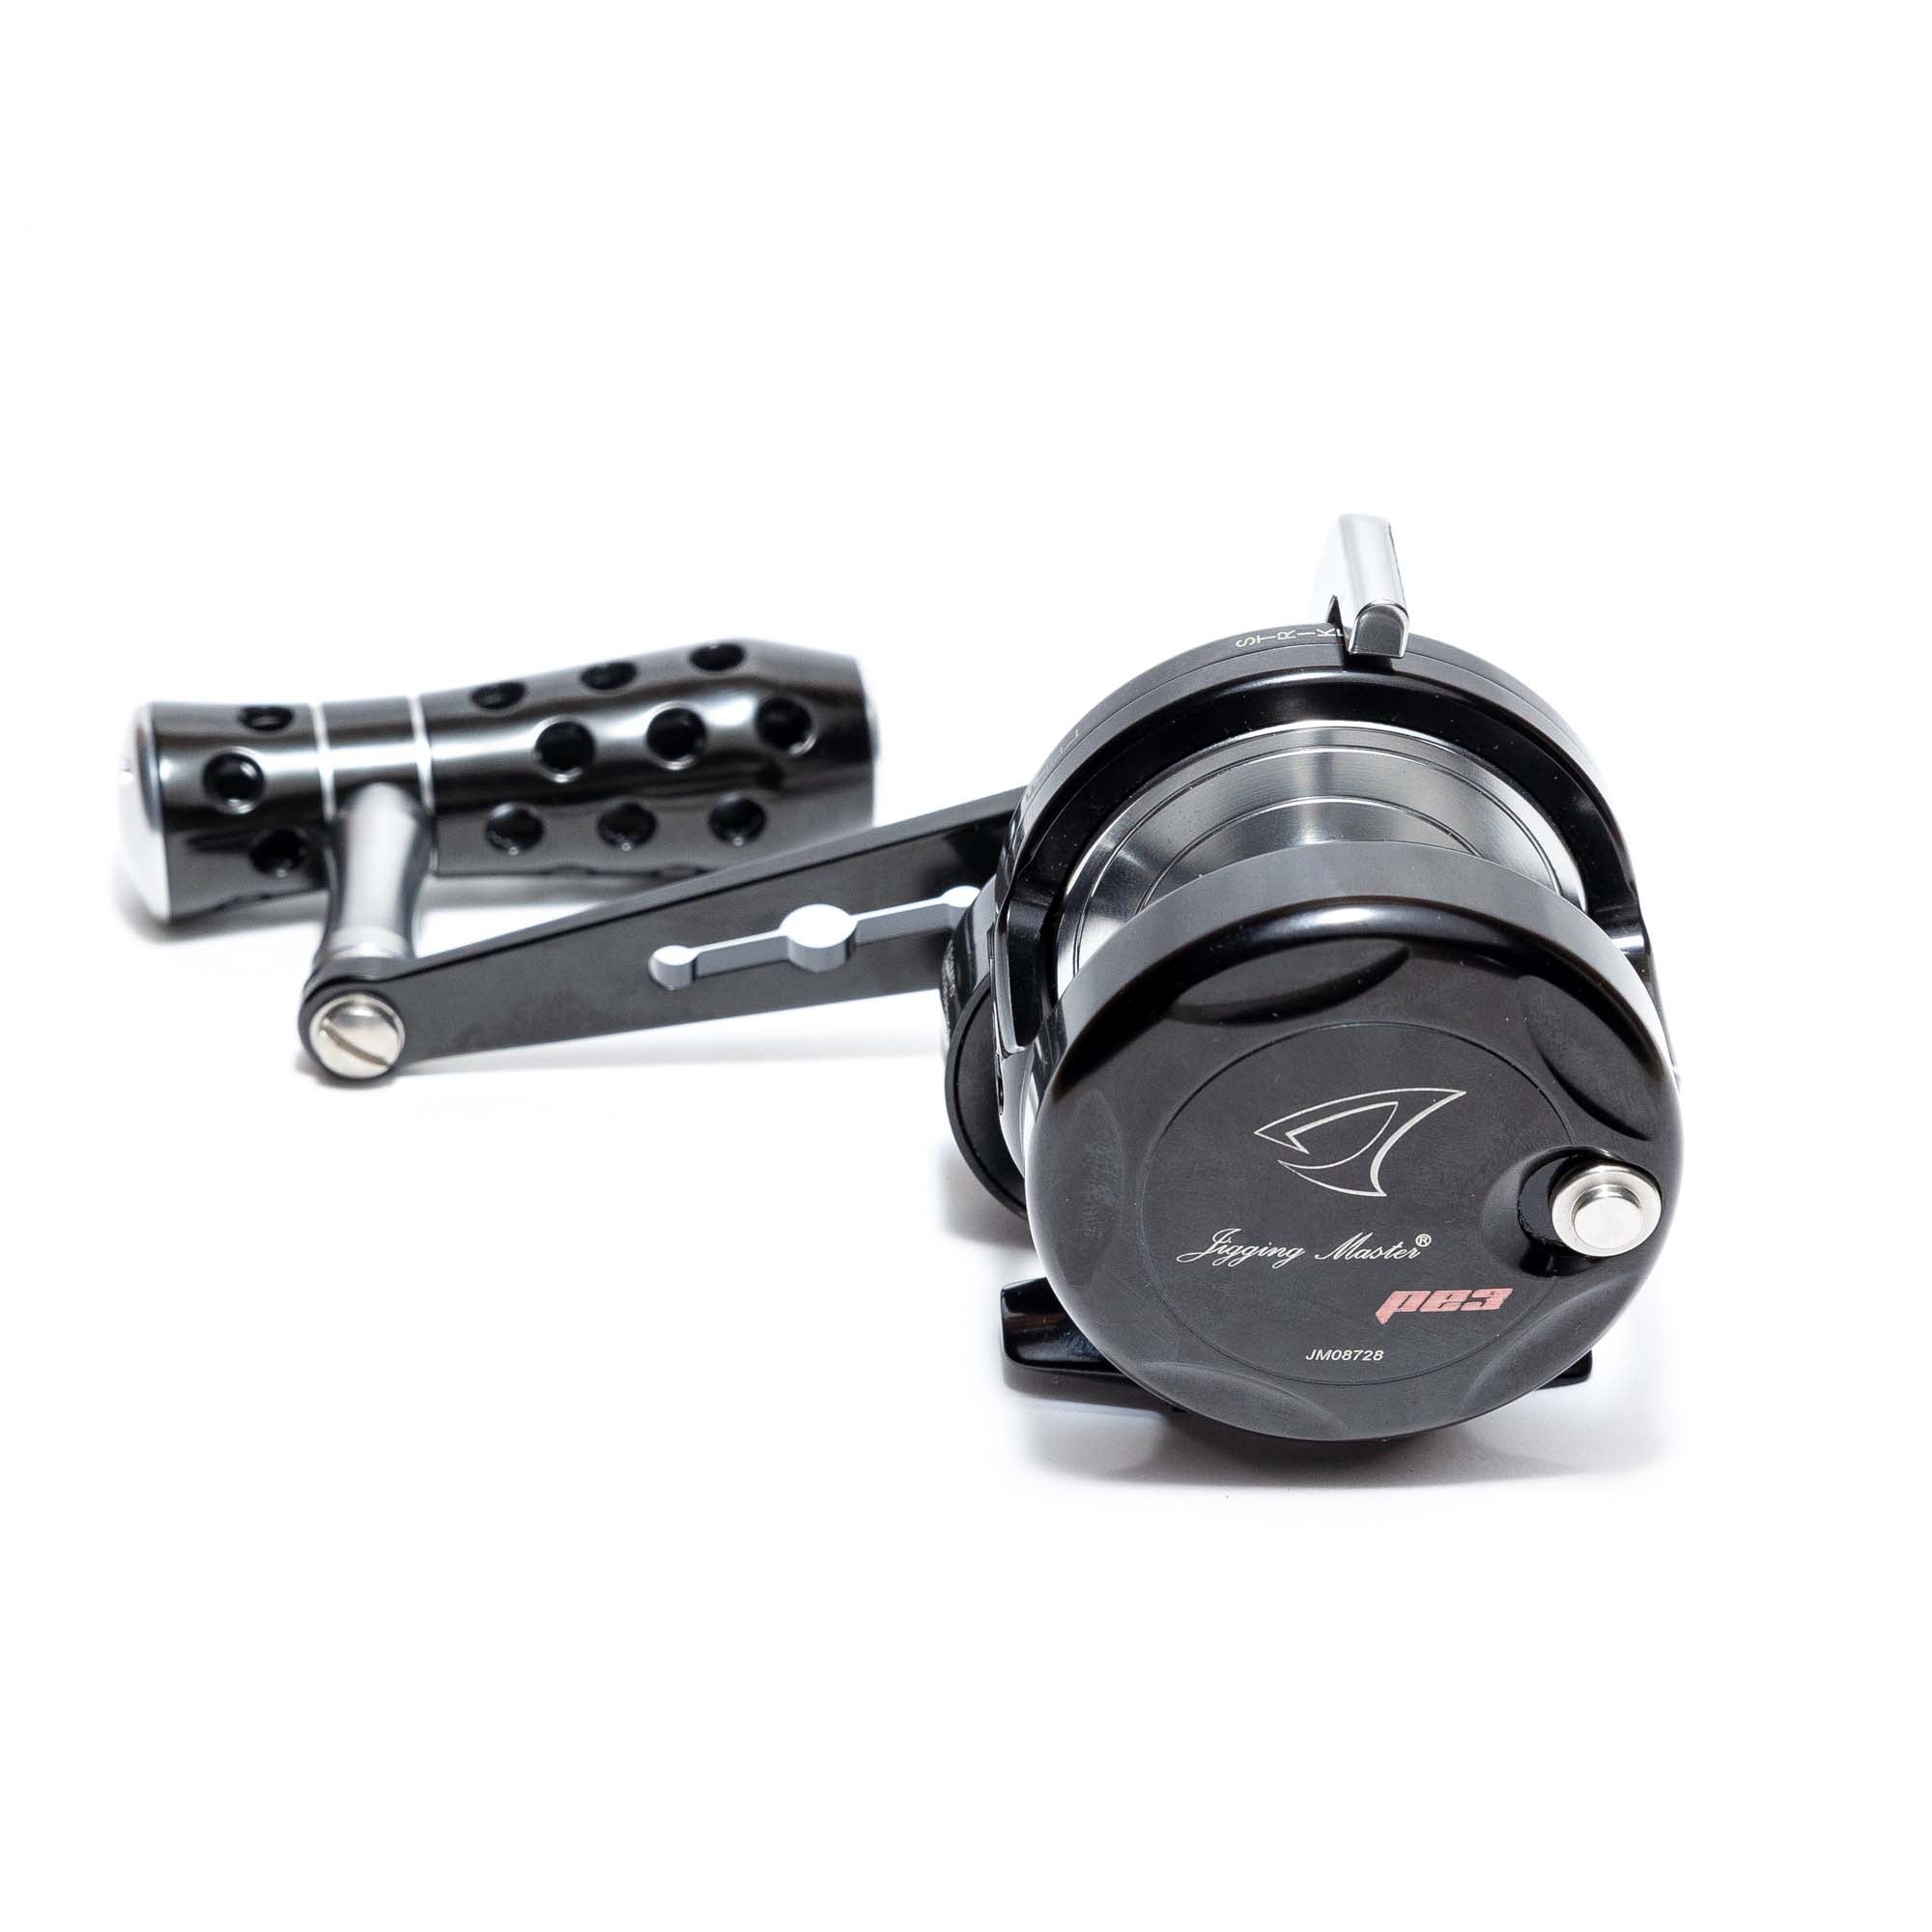 Jigging Master Underhead PE3 Right Handed - Compleat Angler